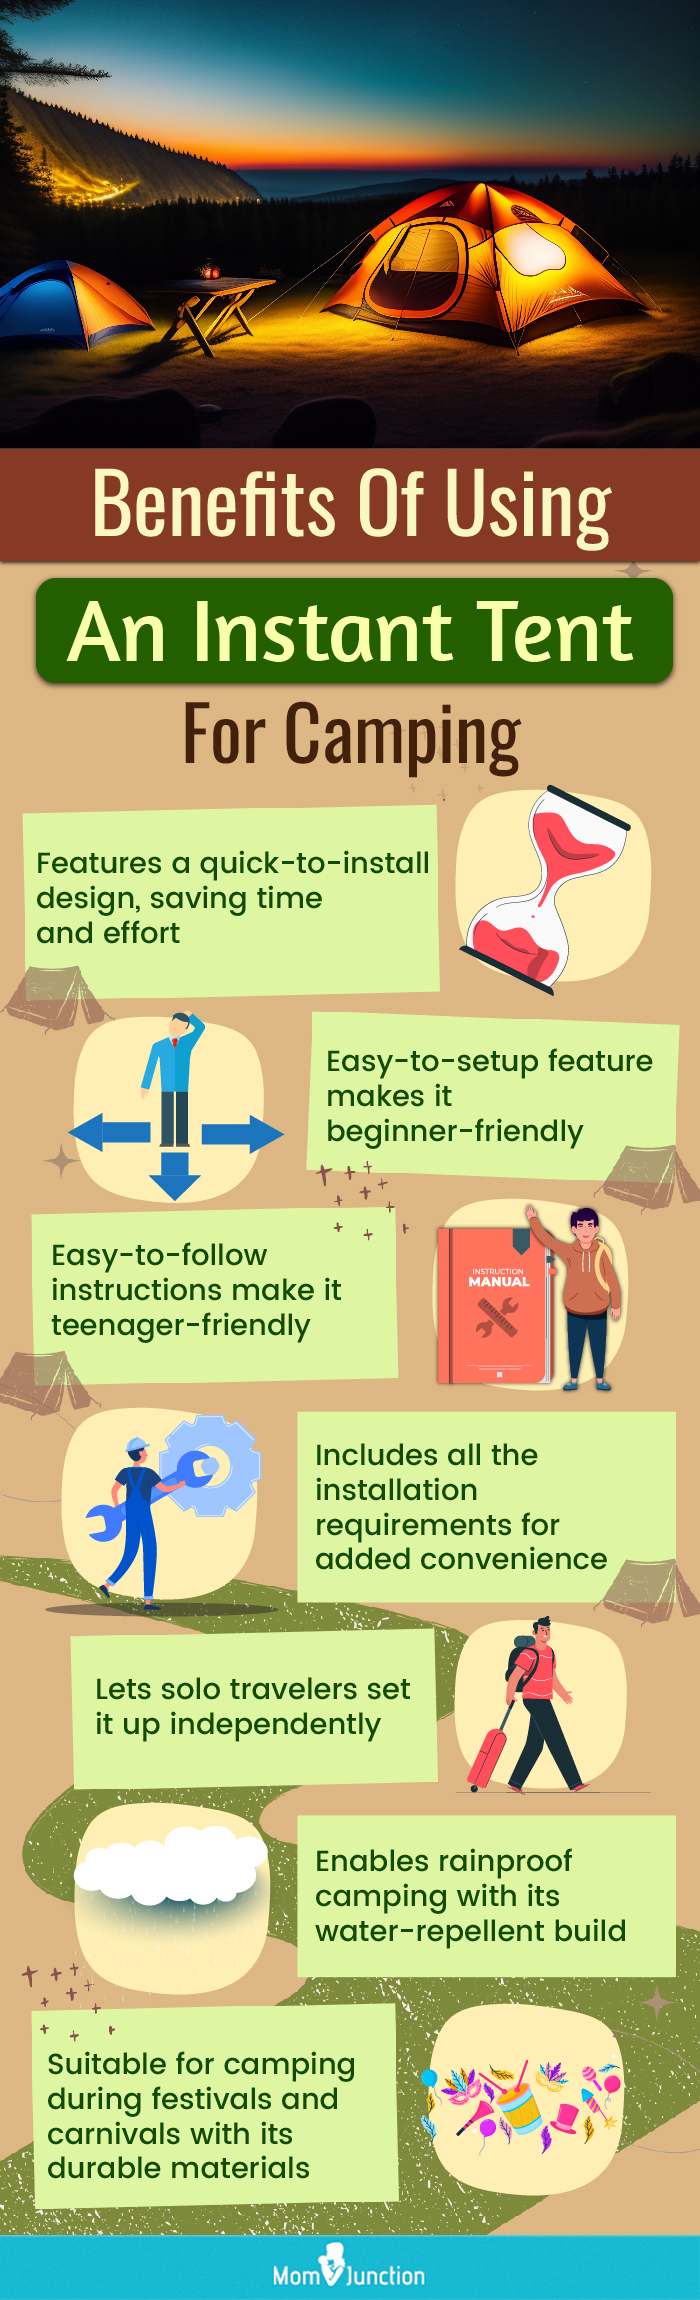 Benefits Of Using An Instant Tent For Camping (infographic)